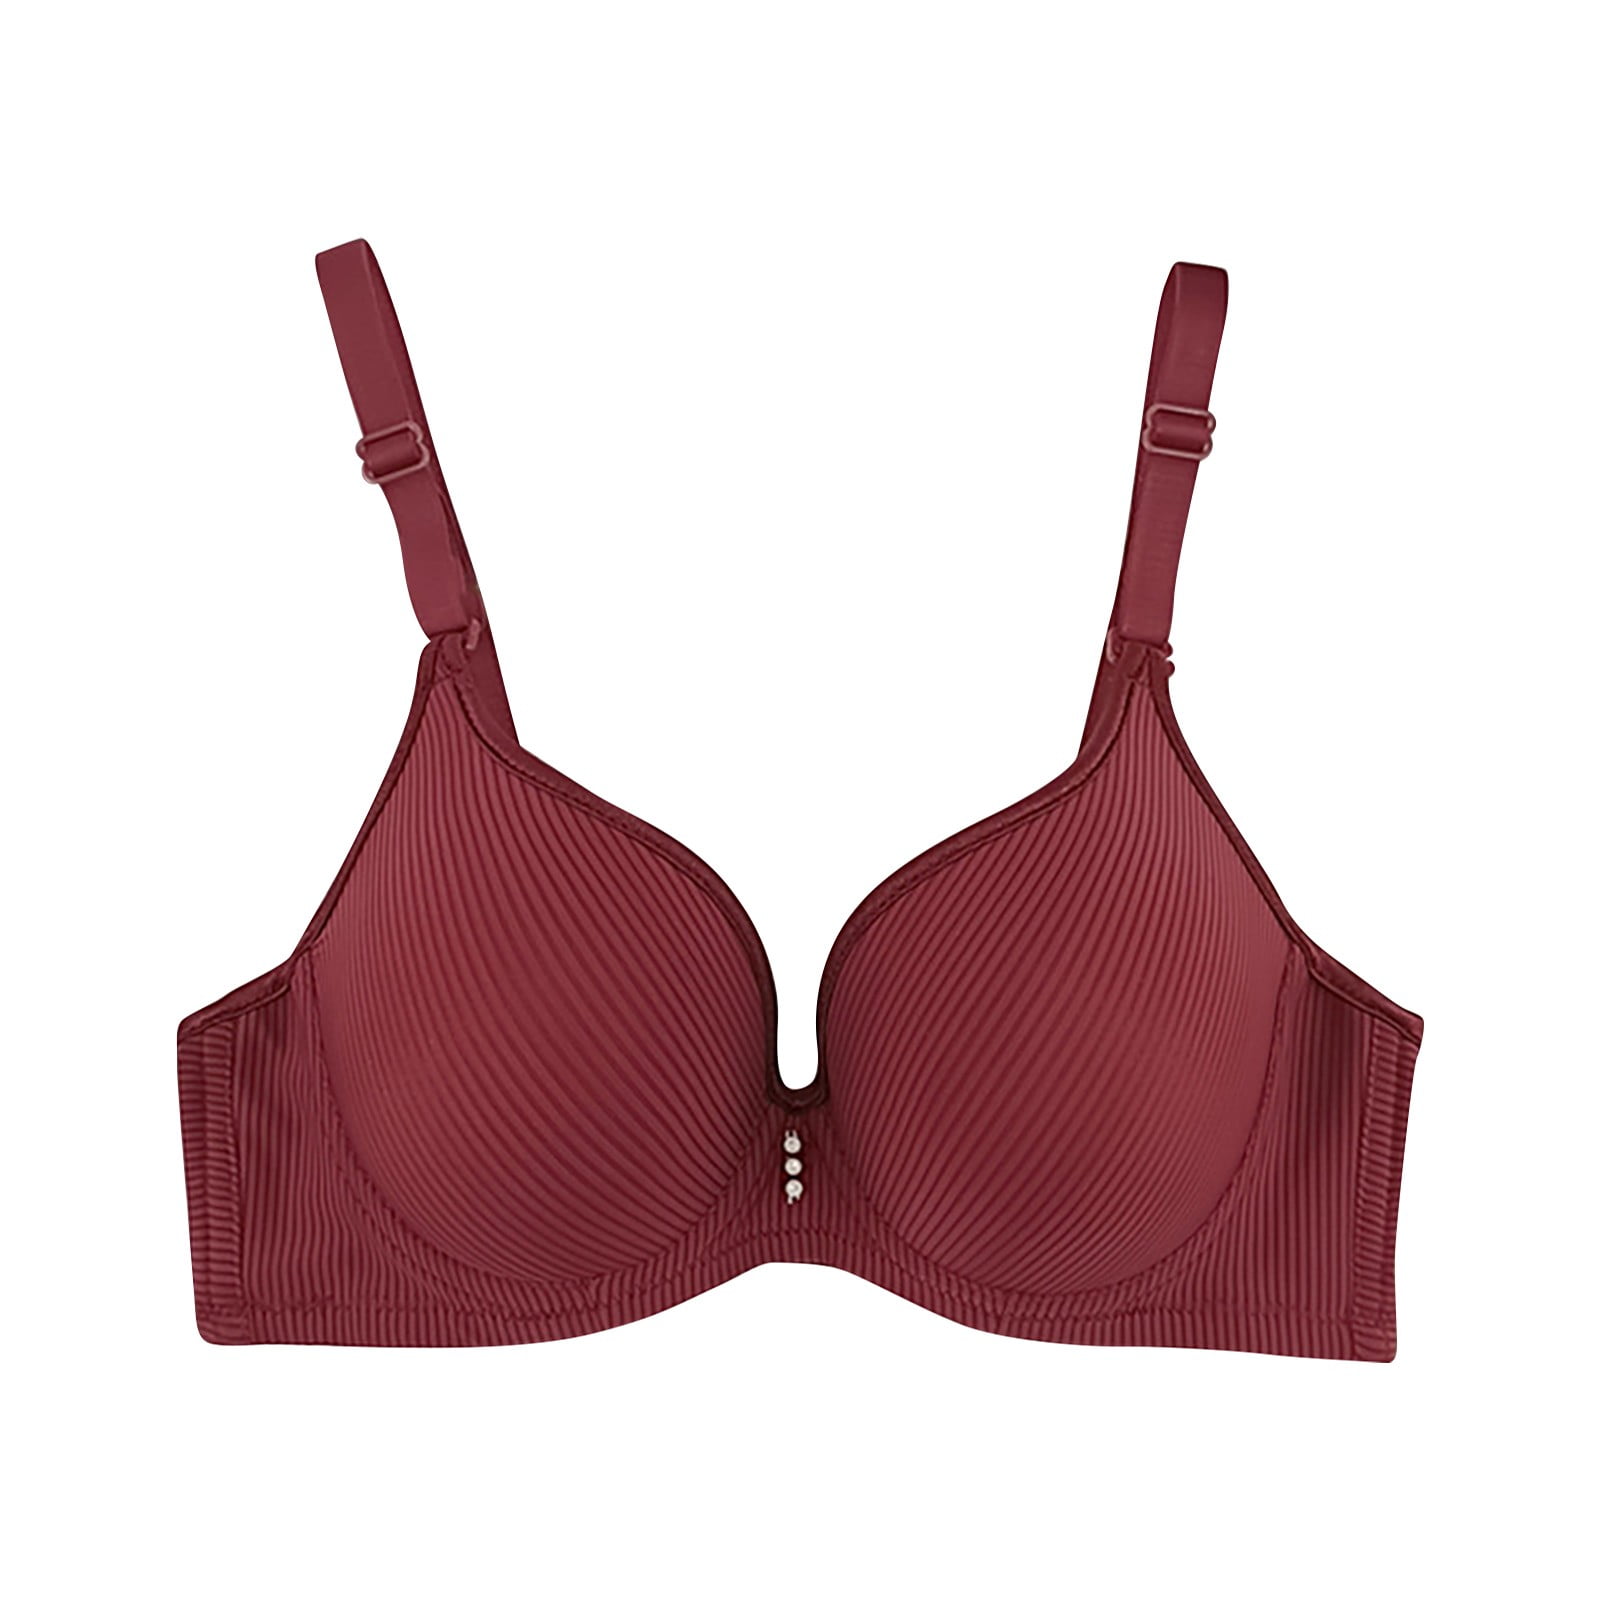 Buy SOLY HUX Women's Front Close Deep V Neck Seamless Wireless Triangle Bras  Adjustable Everyday Basic Bralettes, Solid Brown, S at